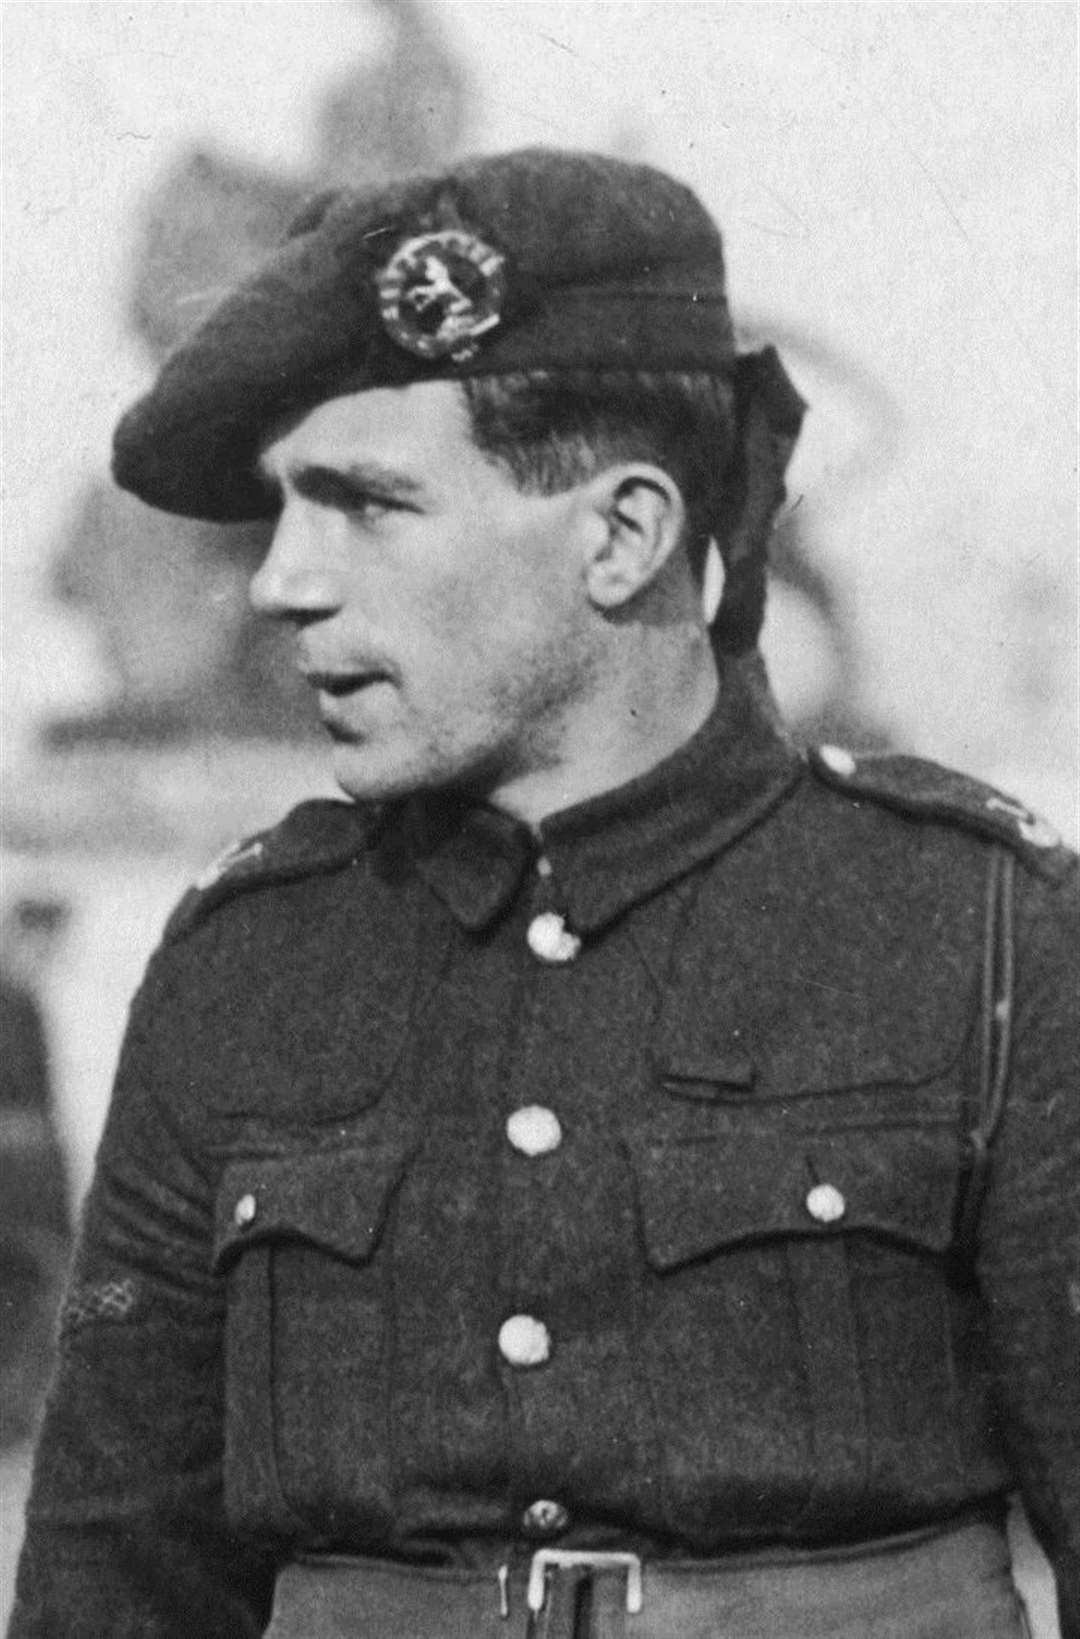 Robert McBeath was the youngest Scottish Victoria Cross recipient during World War I, and the only one from Sutherland.